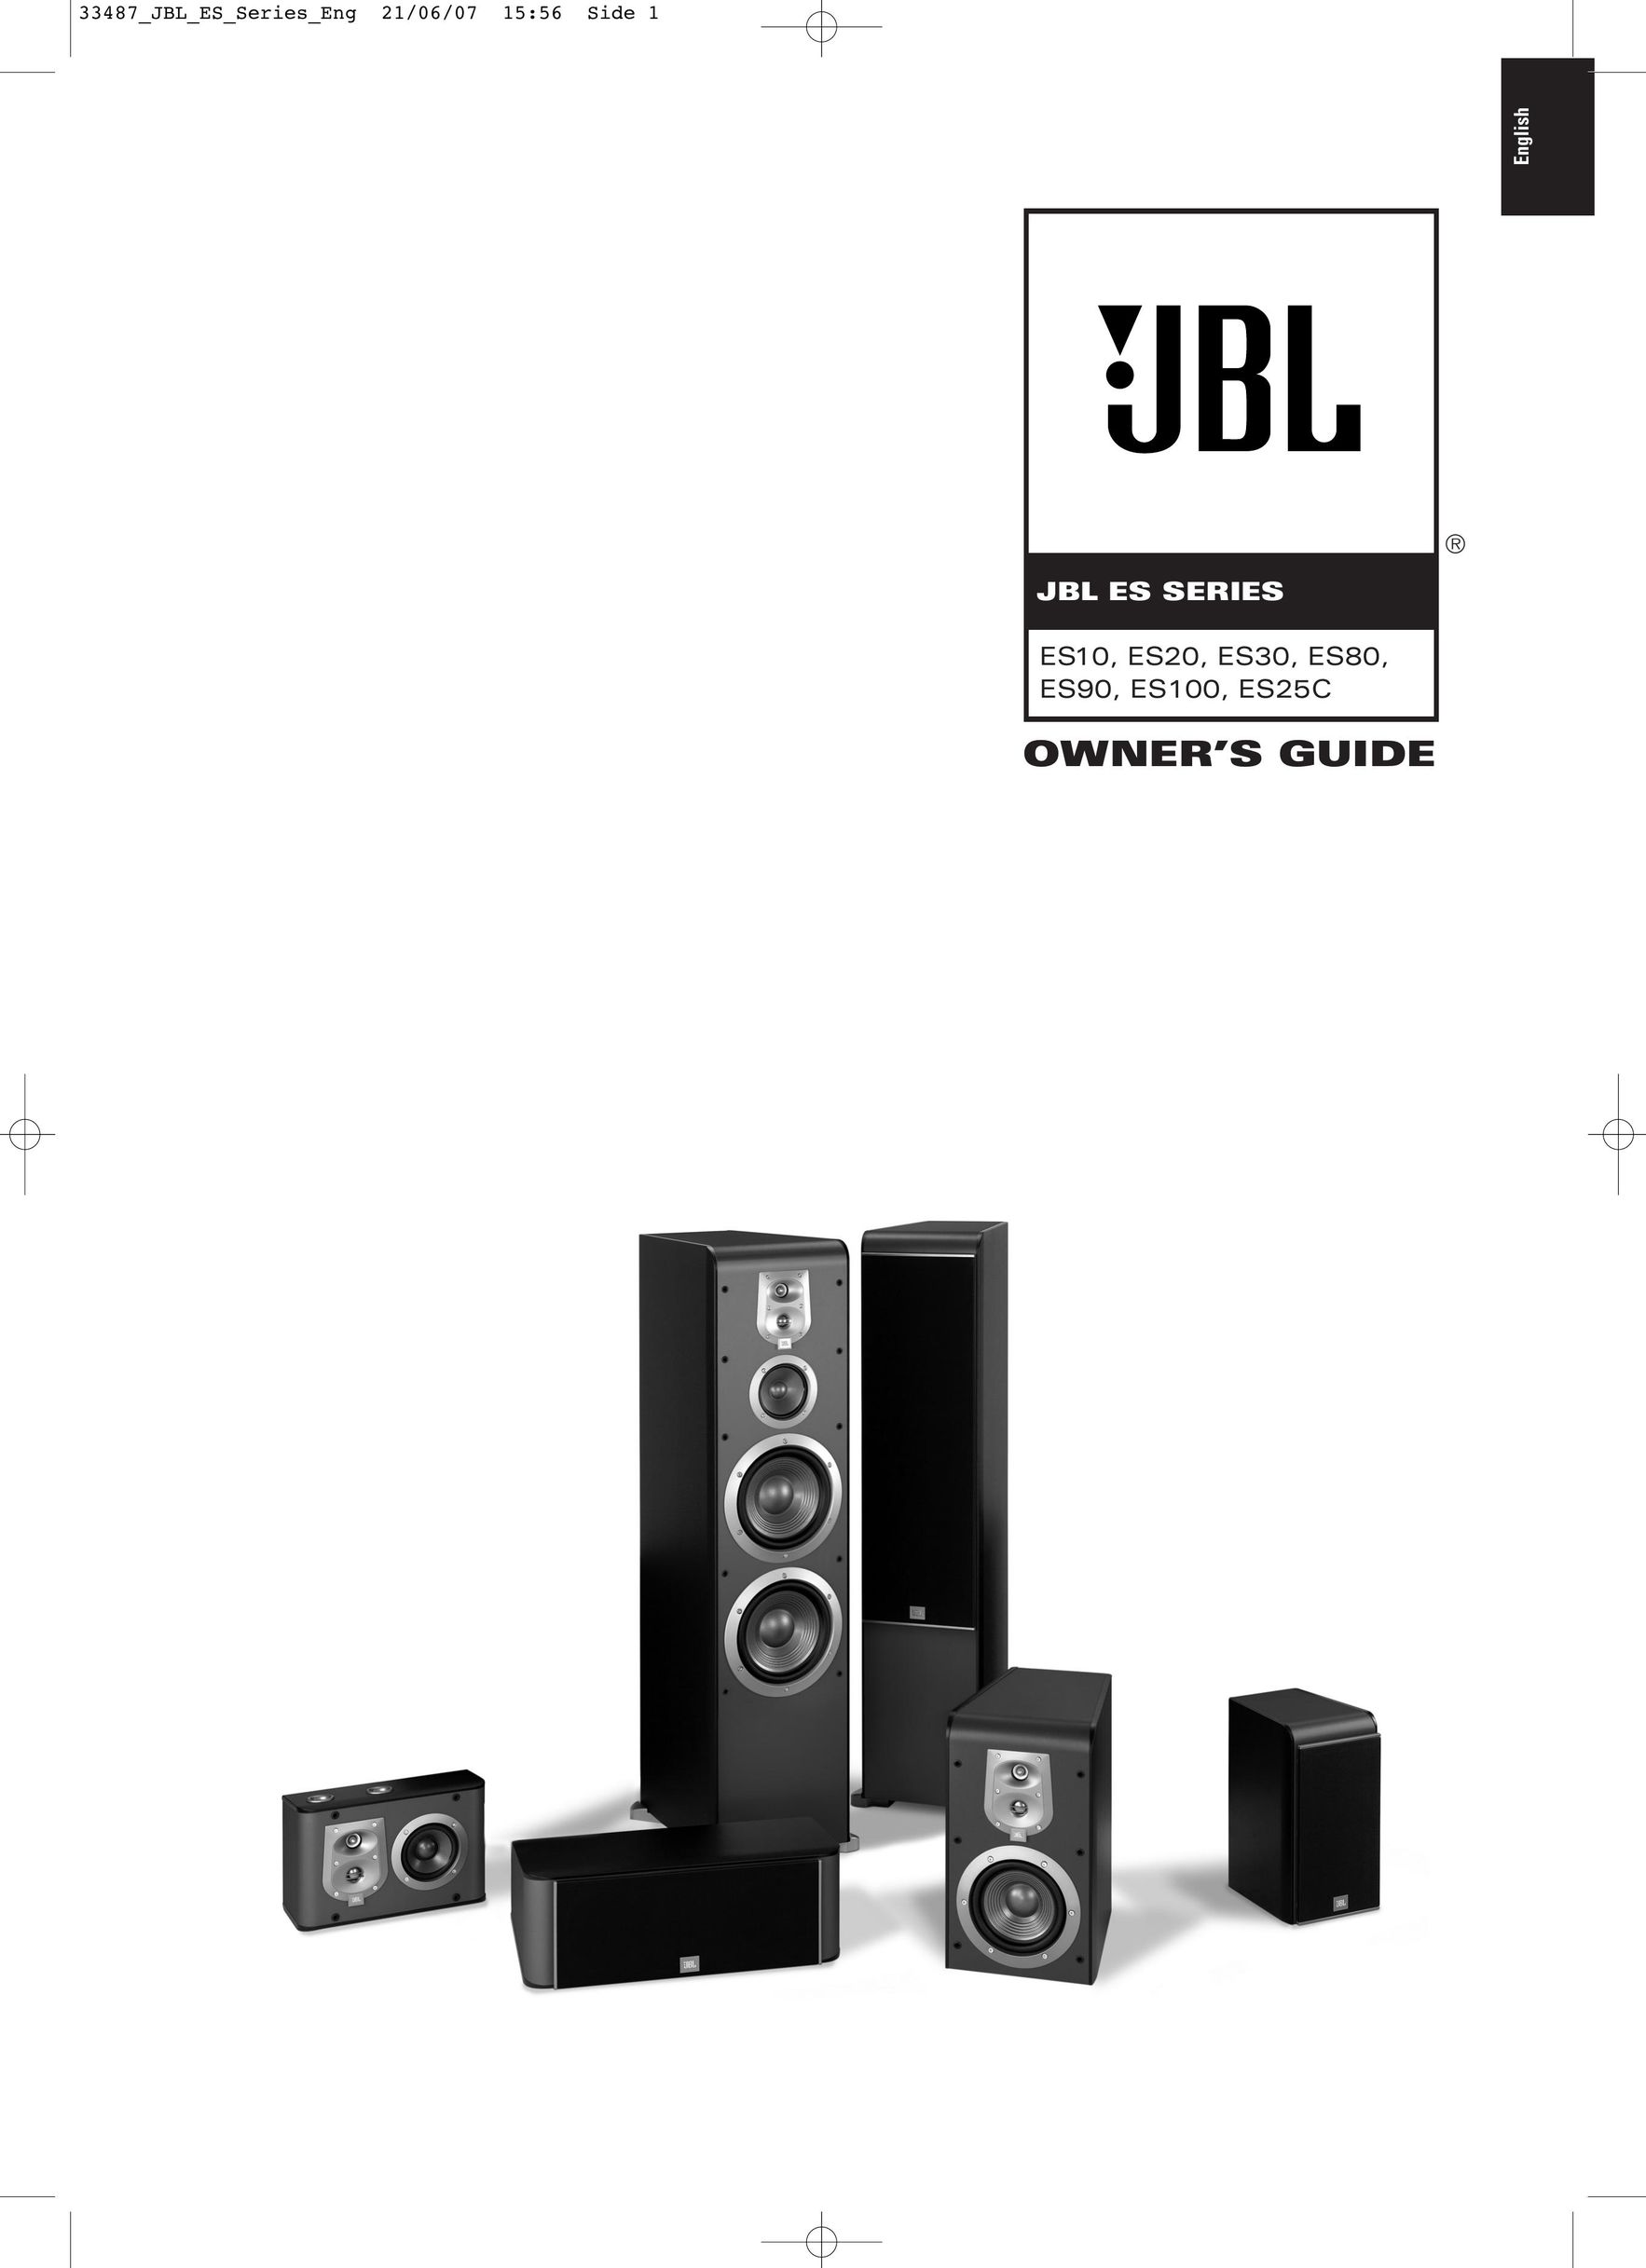 JBL ES100 Home Theater System User Manual